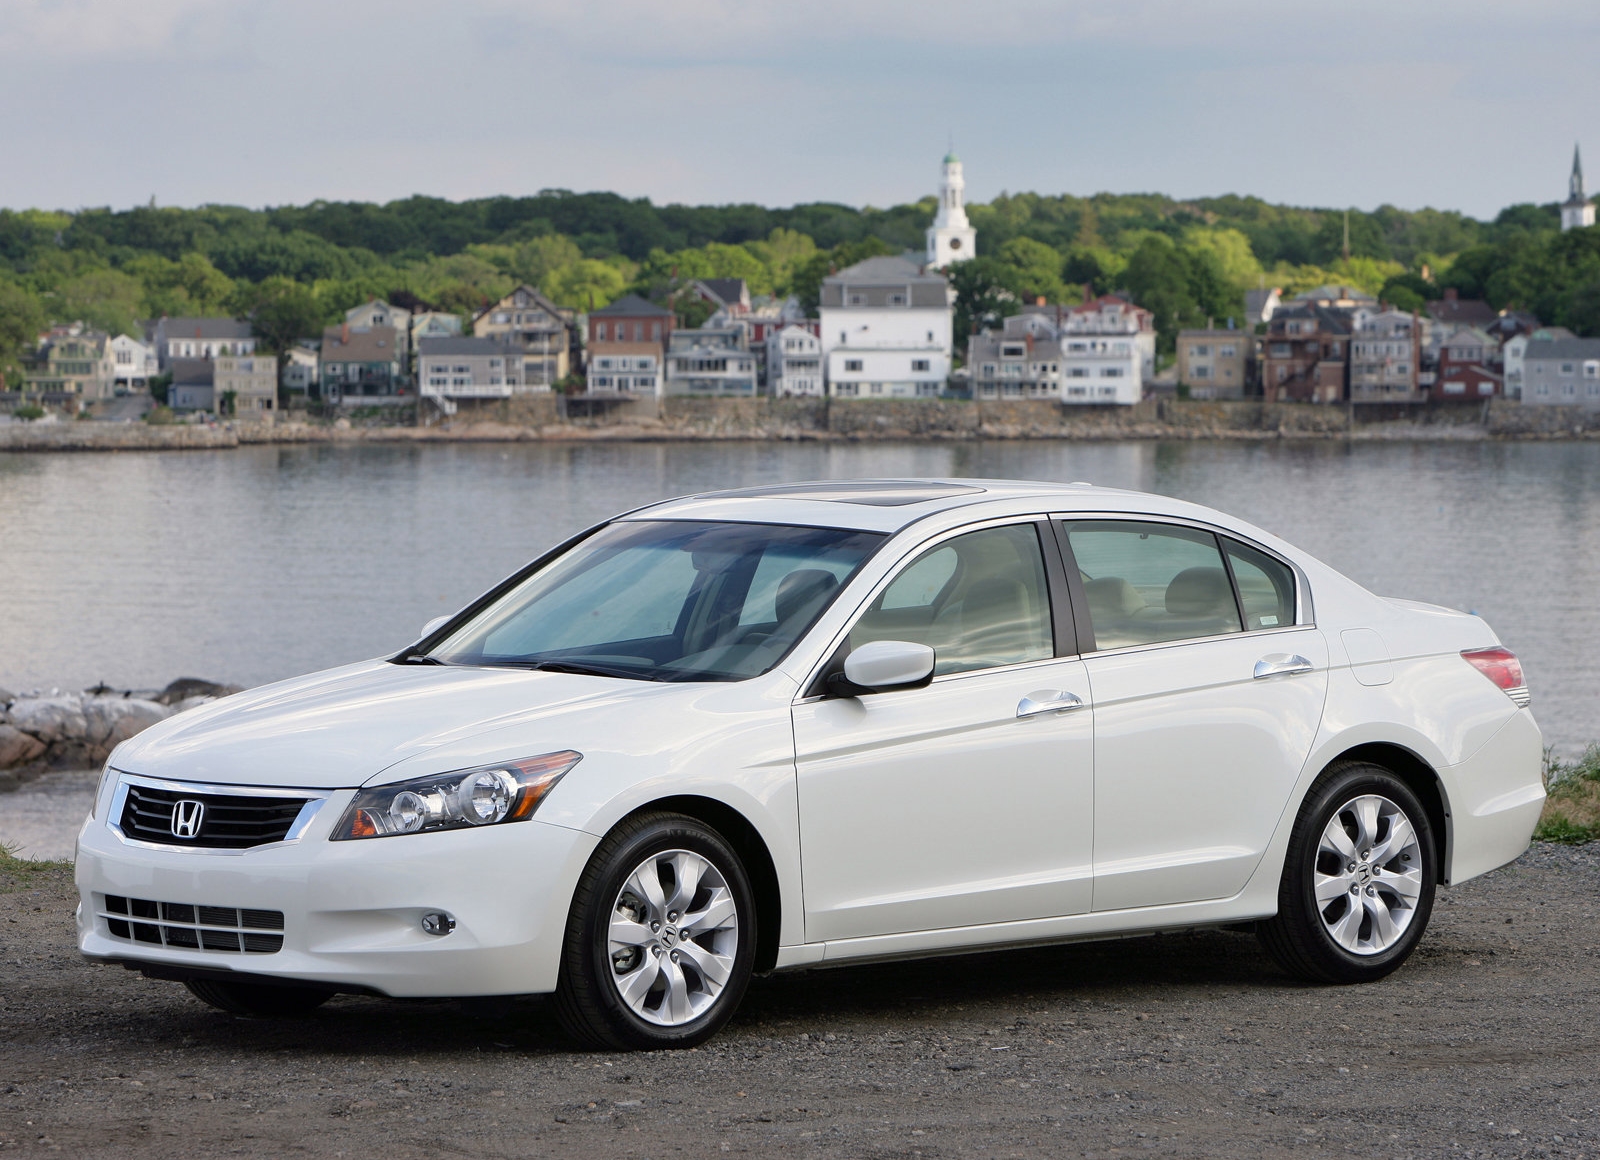 2008 Honda Accord LX-P Full Specs, Features and Price | CarBuzz